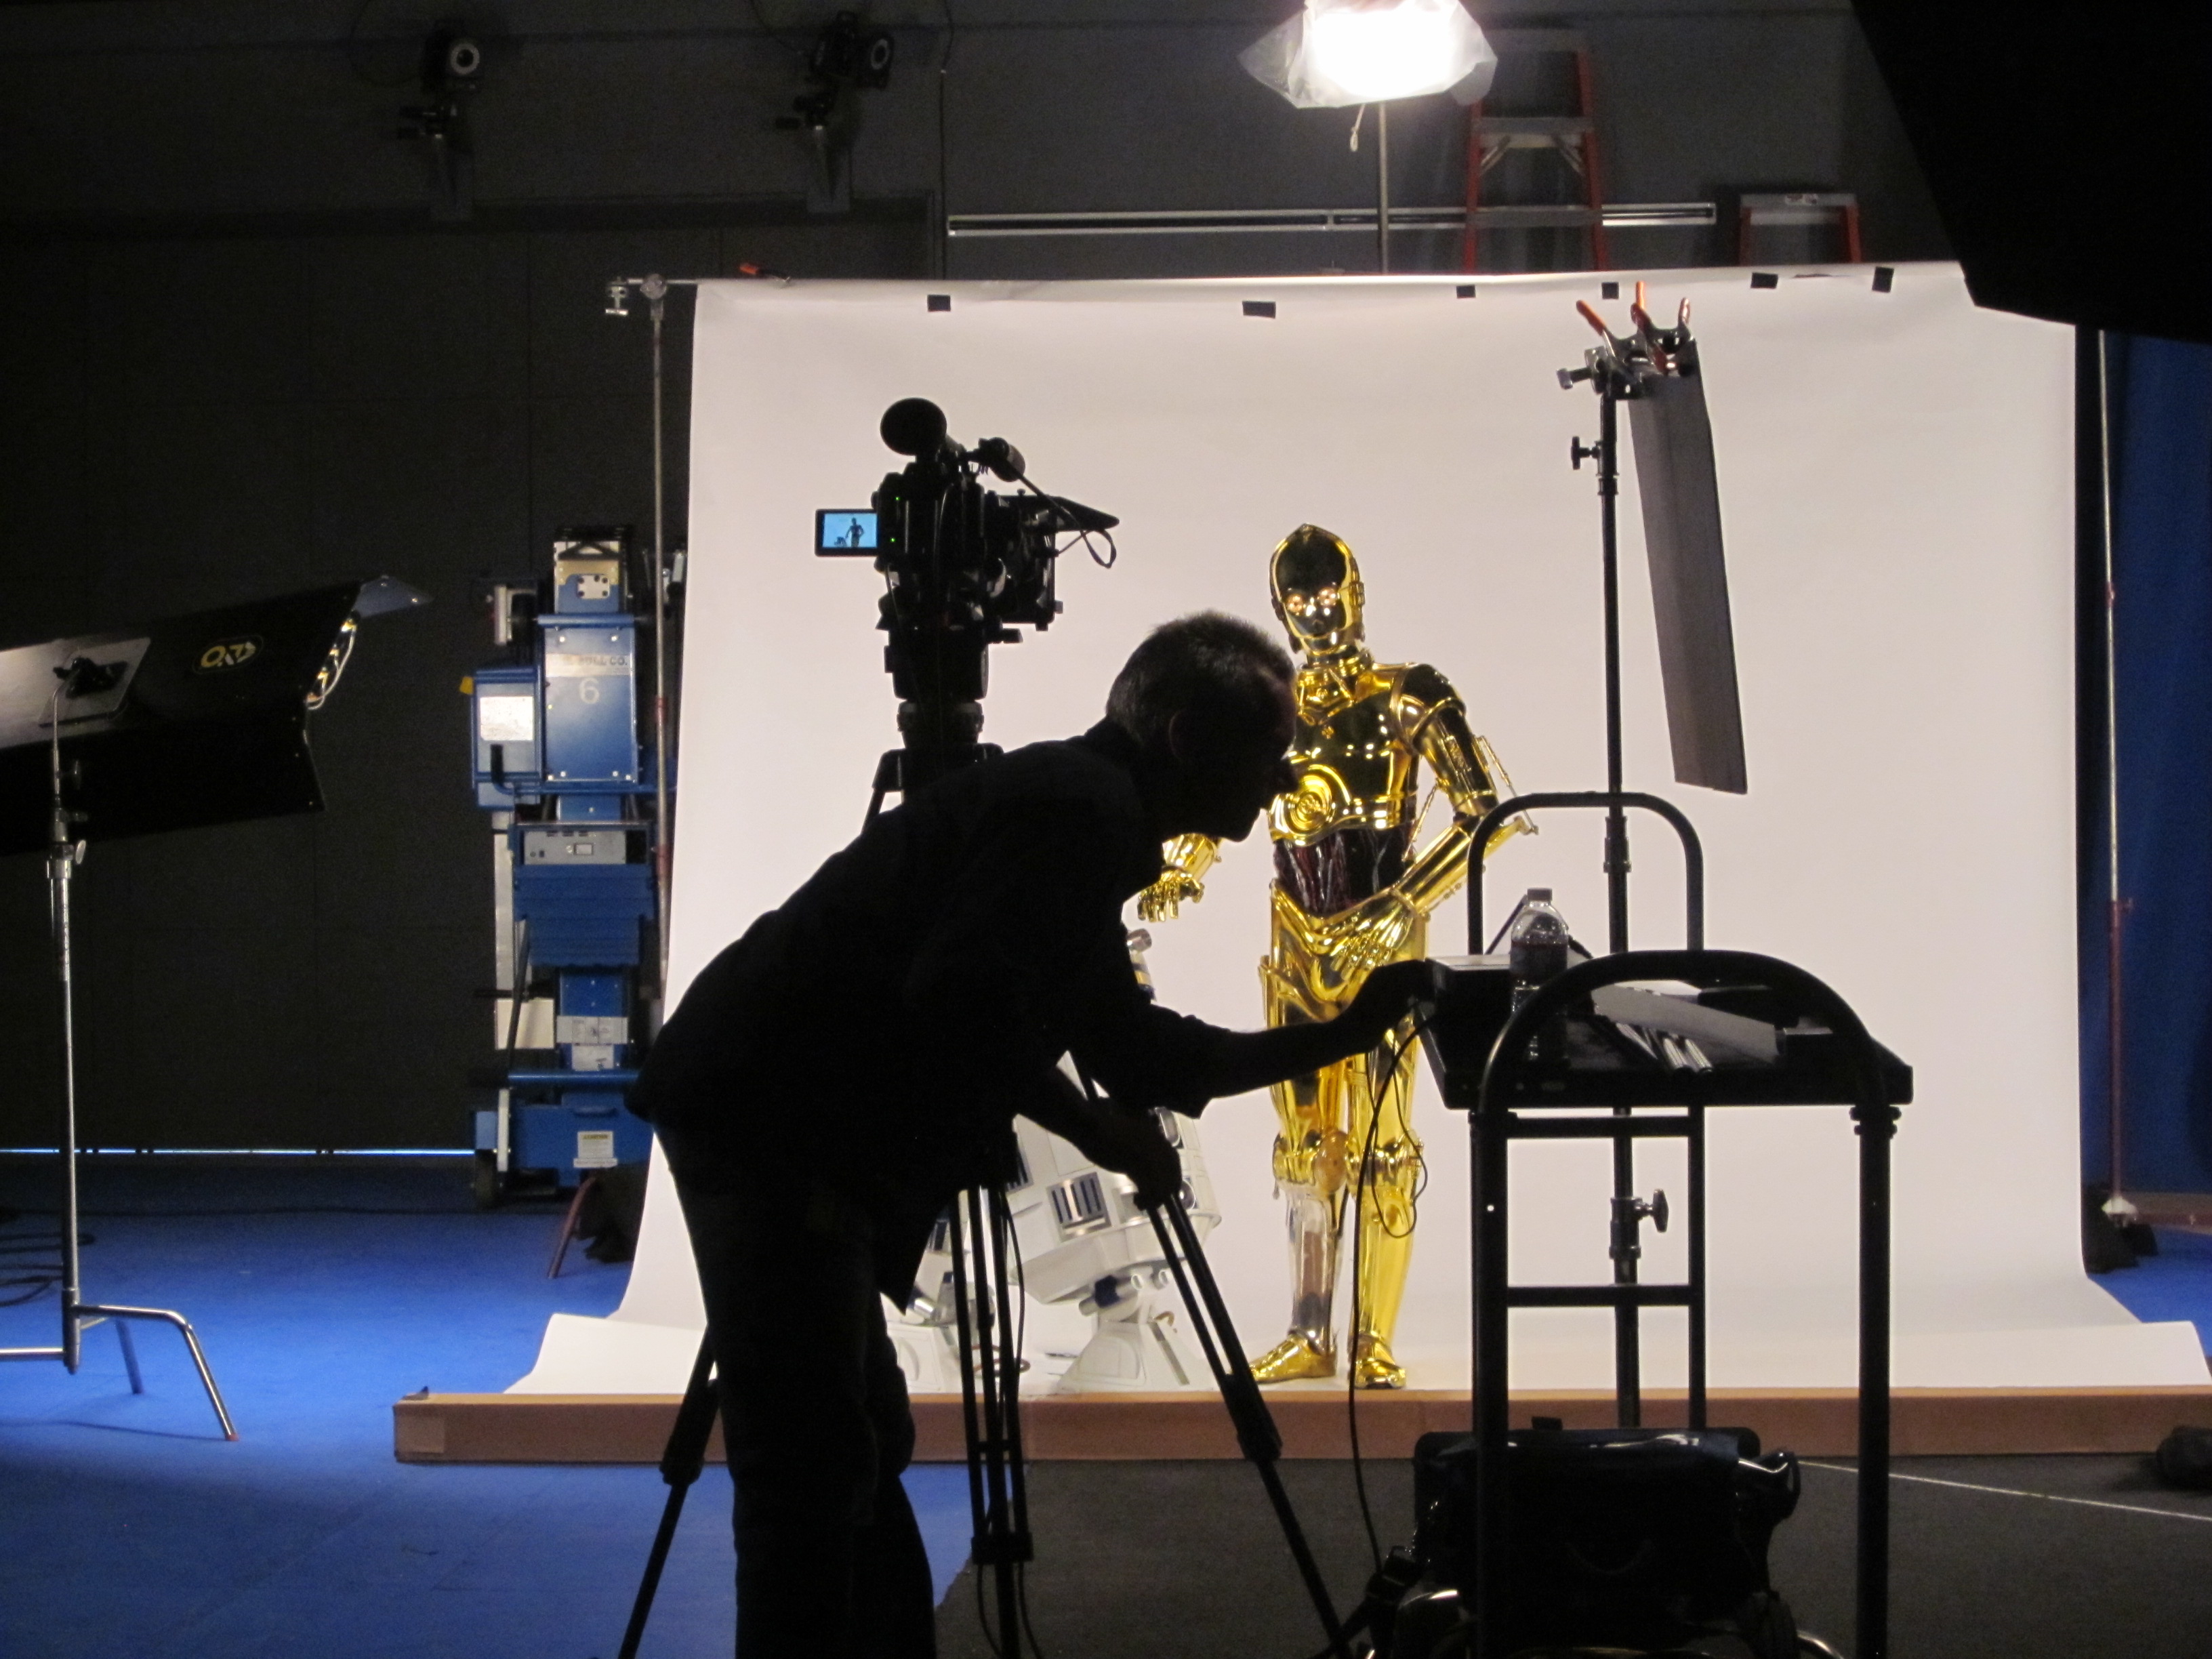 Chris F. Bartlett as C-3PO at Lucasfilm filming for Variety Children's Charity.